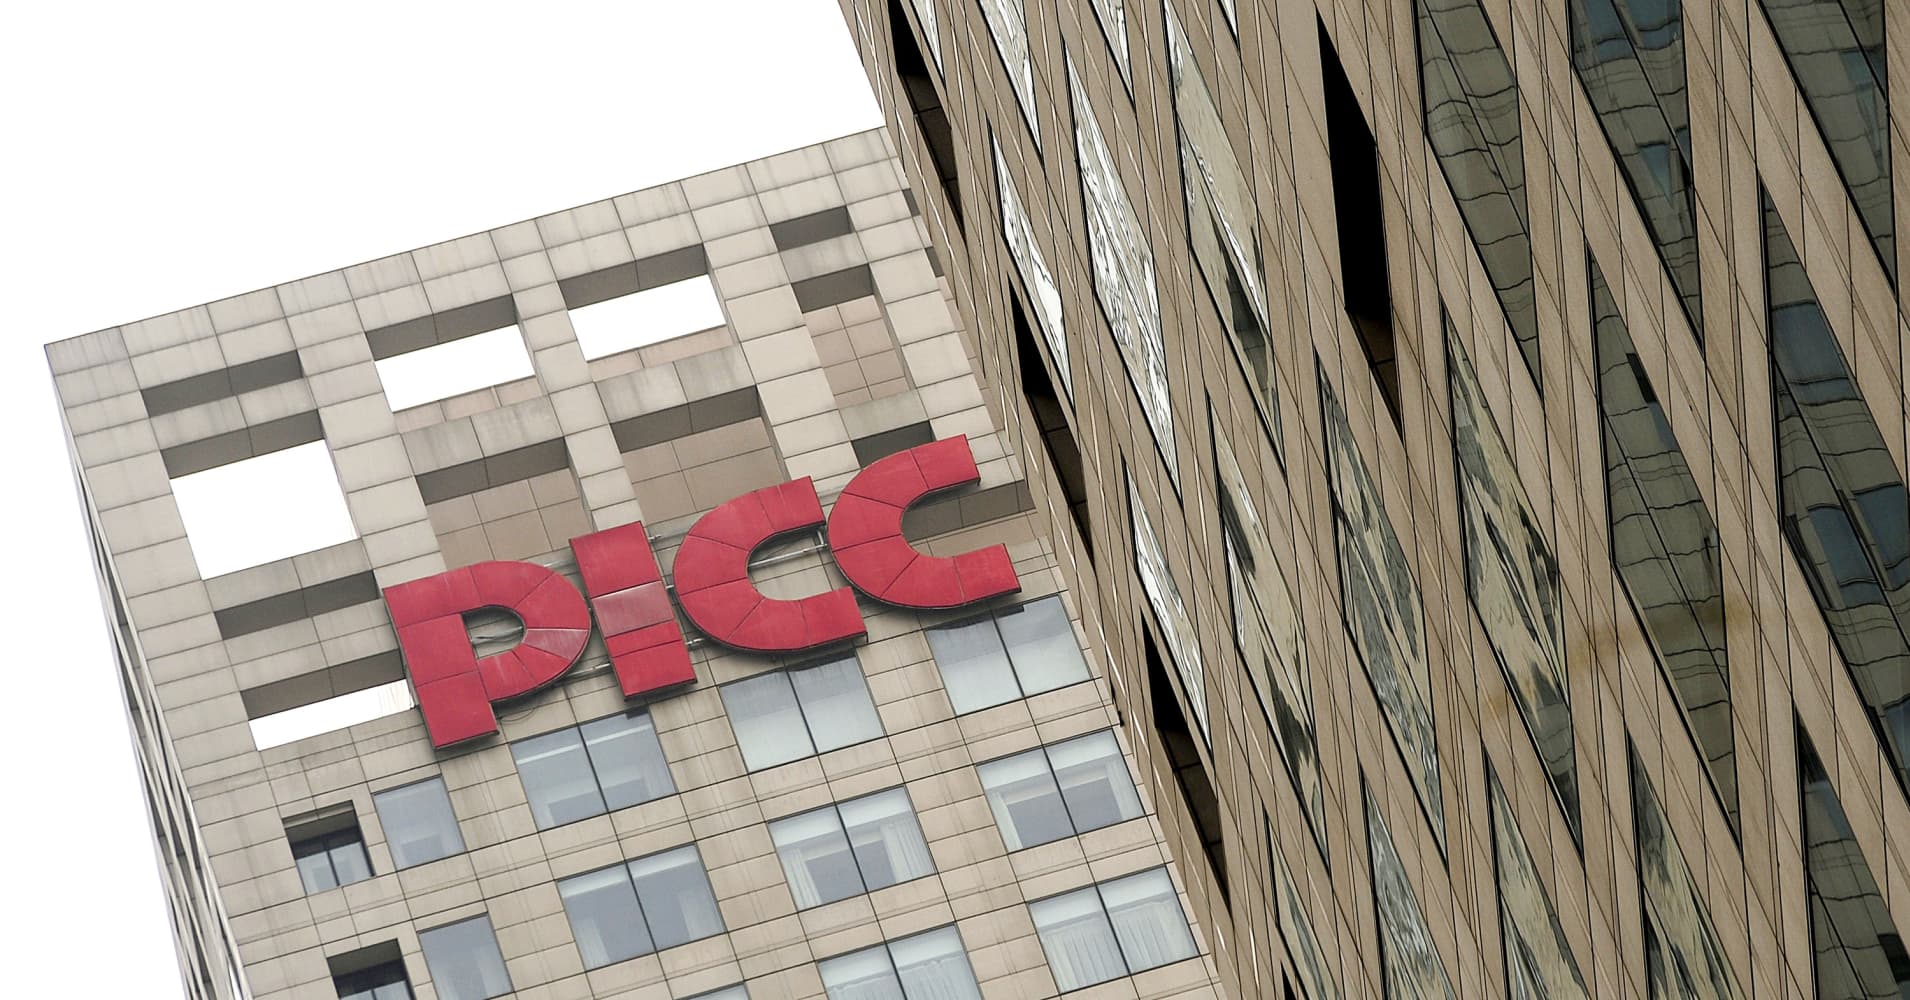 AIG aims to sell down $1.2B stake in China insurer PICC